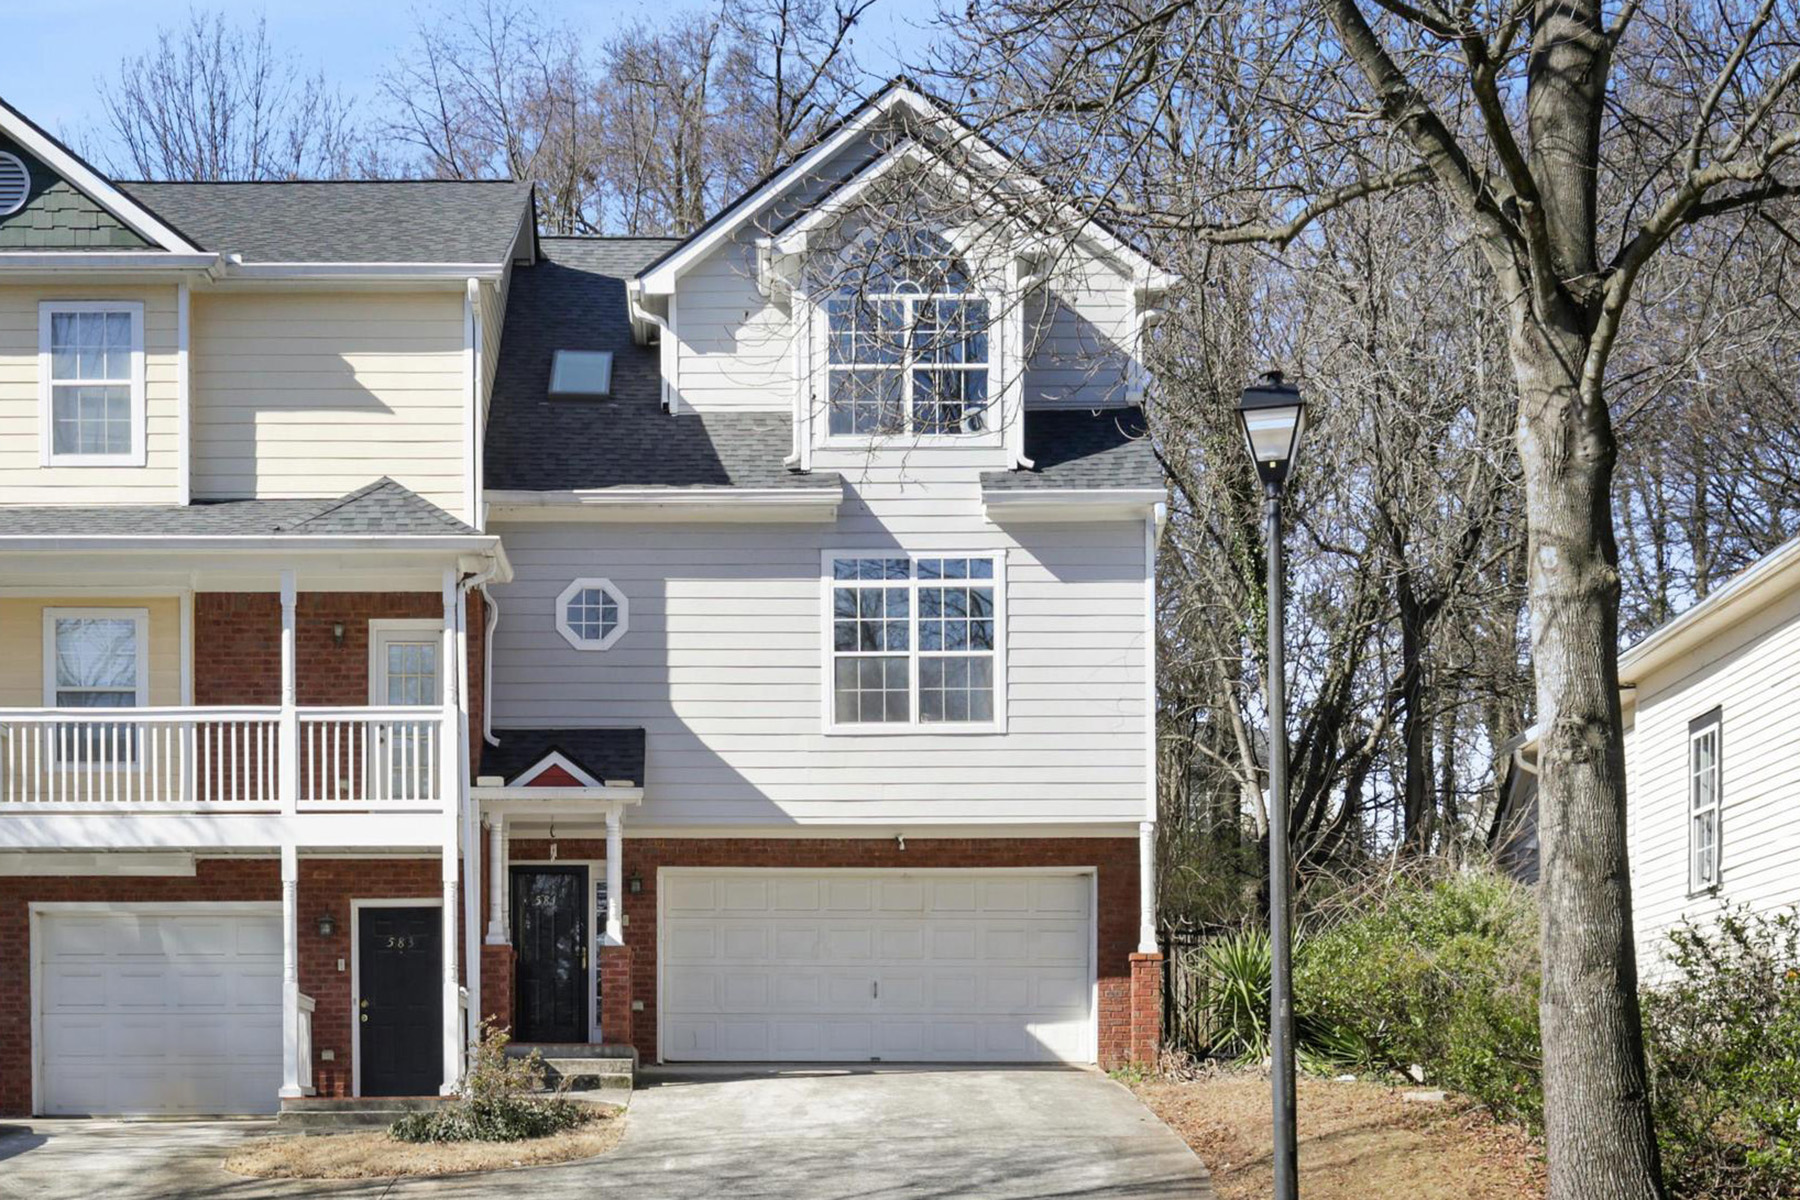 Three Story End Unit Townhome in Convenient Mechanicsville Location